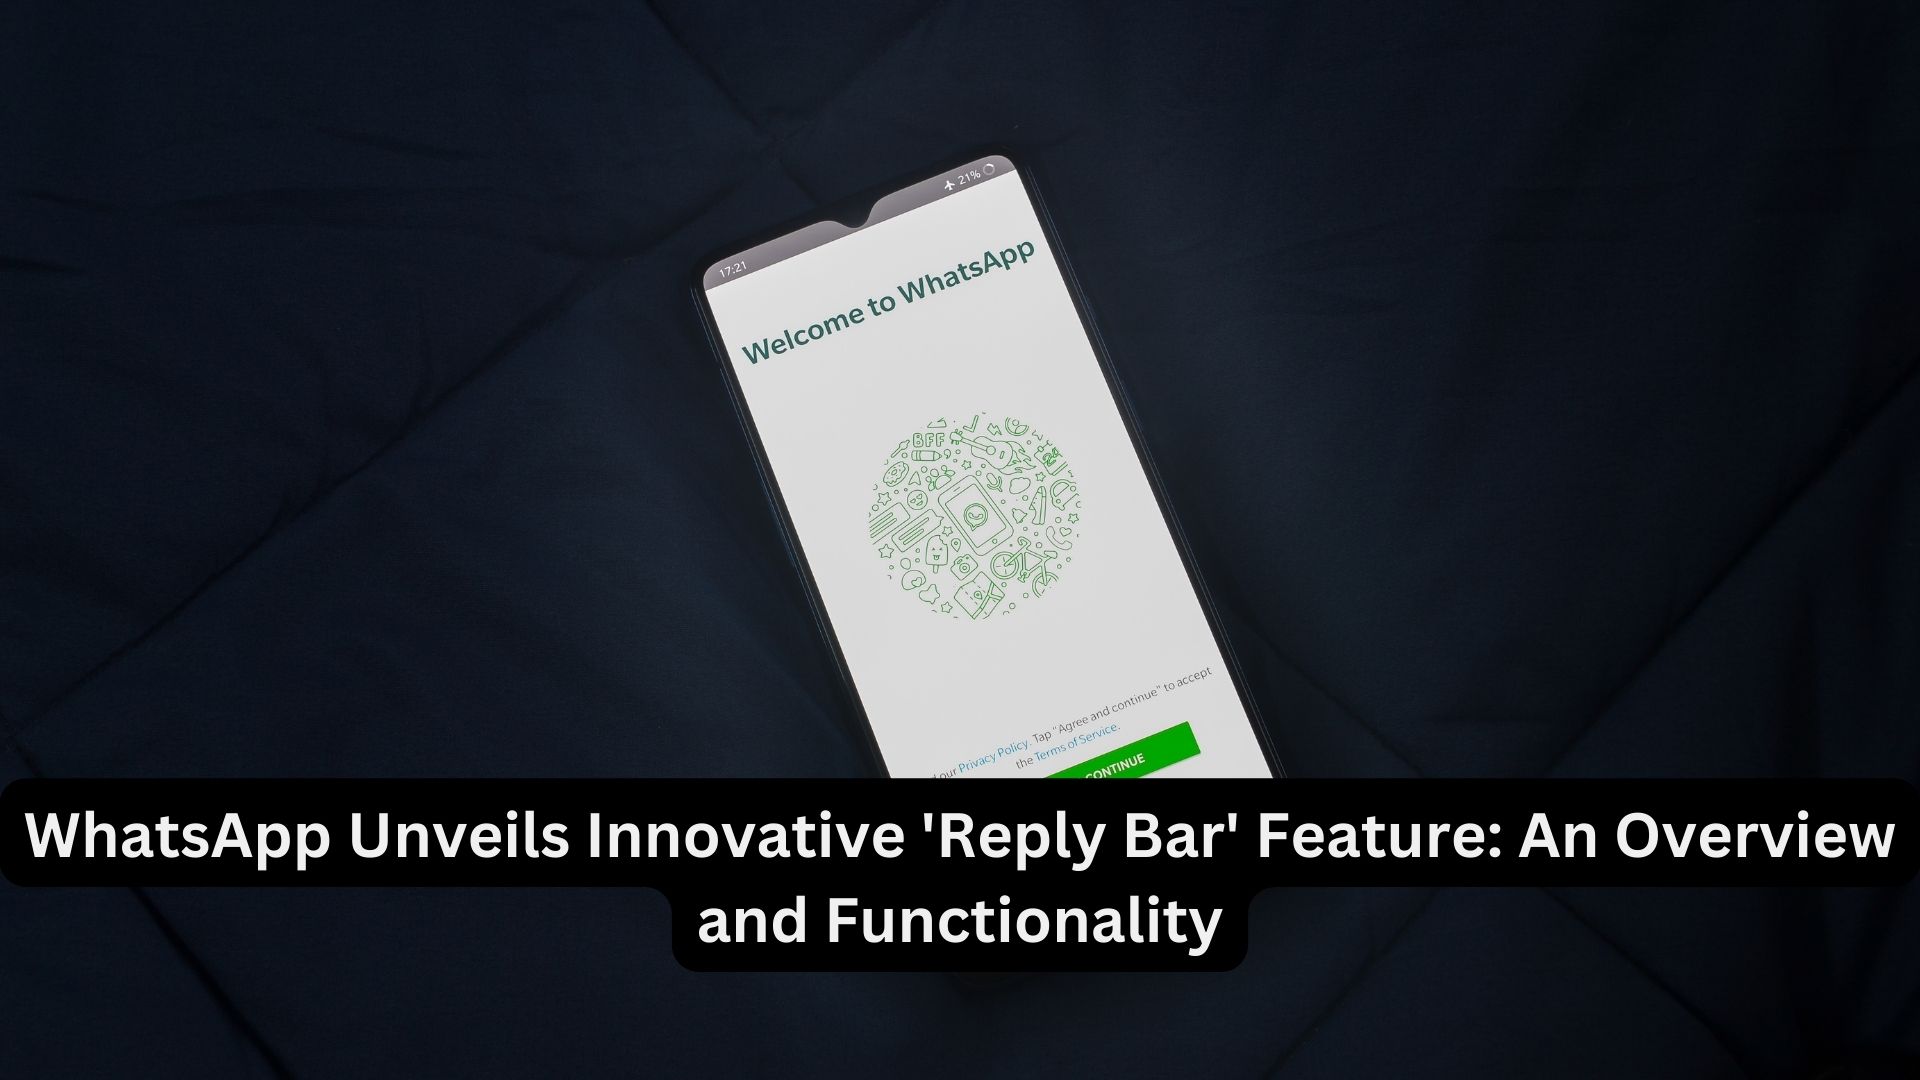 WhatsApp Unveils Innovative 'Reply Bar' Feature: An Overview and Functionality